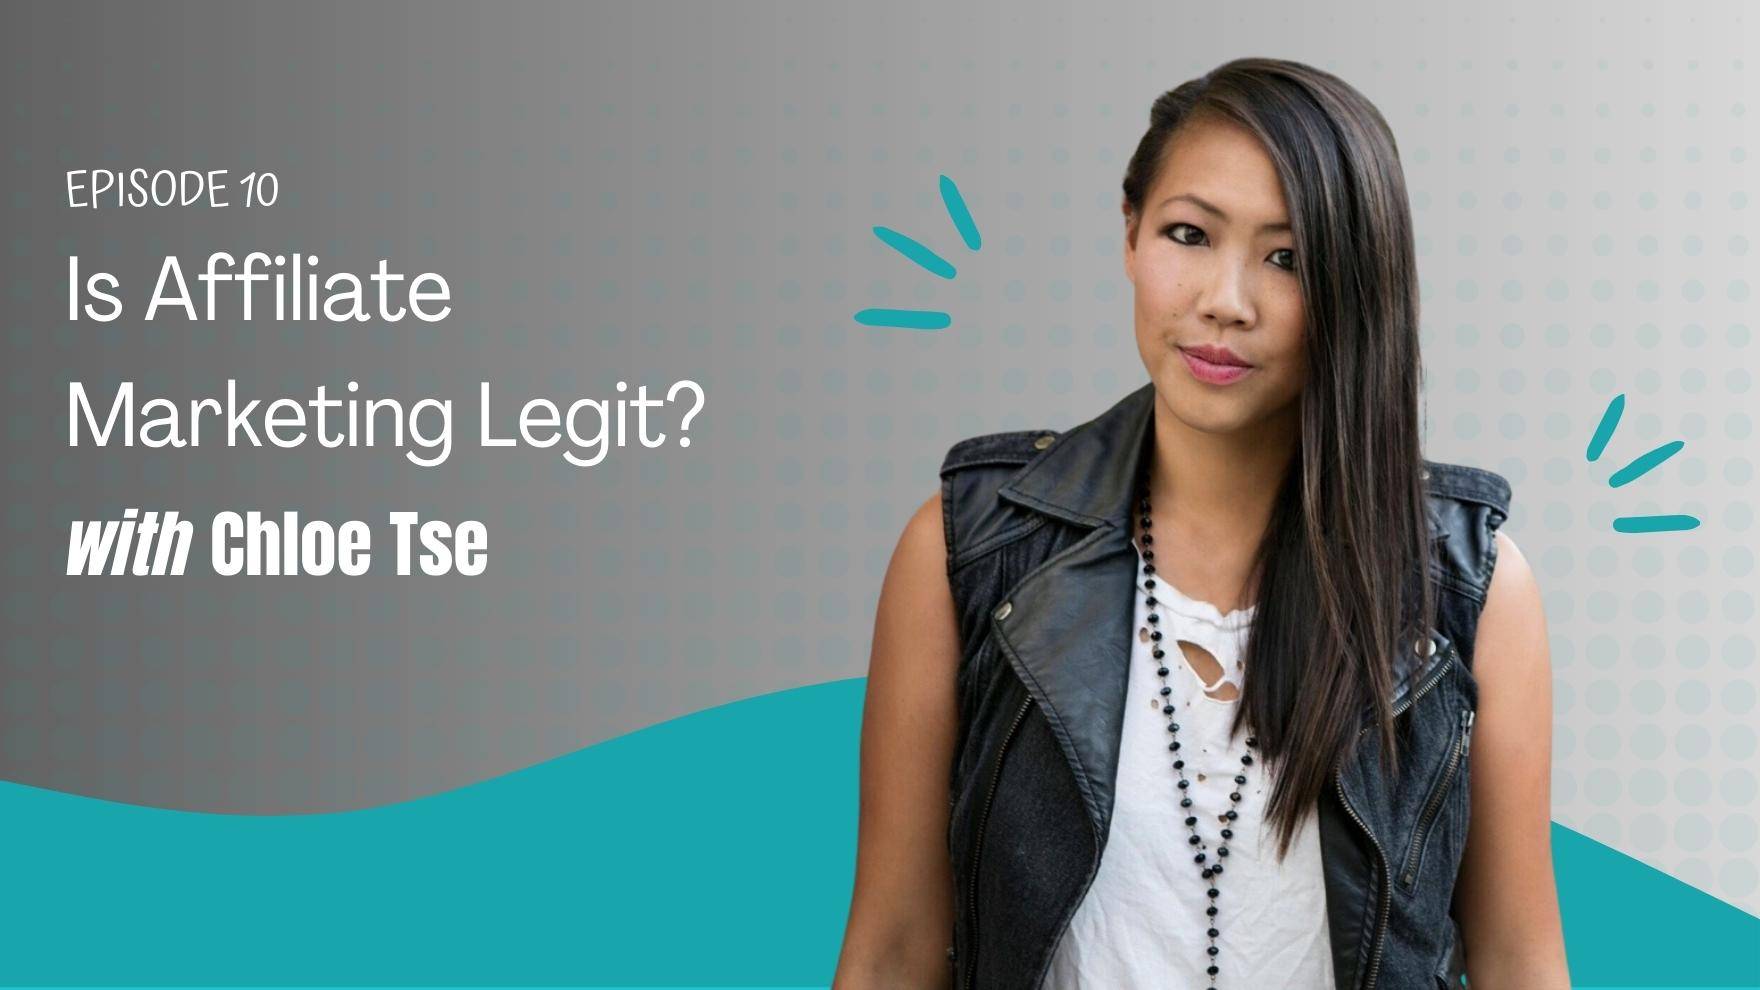 Is Affiliate Marketing Legit? With Chloe Tse from PartnerStack